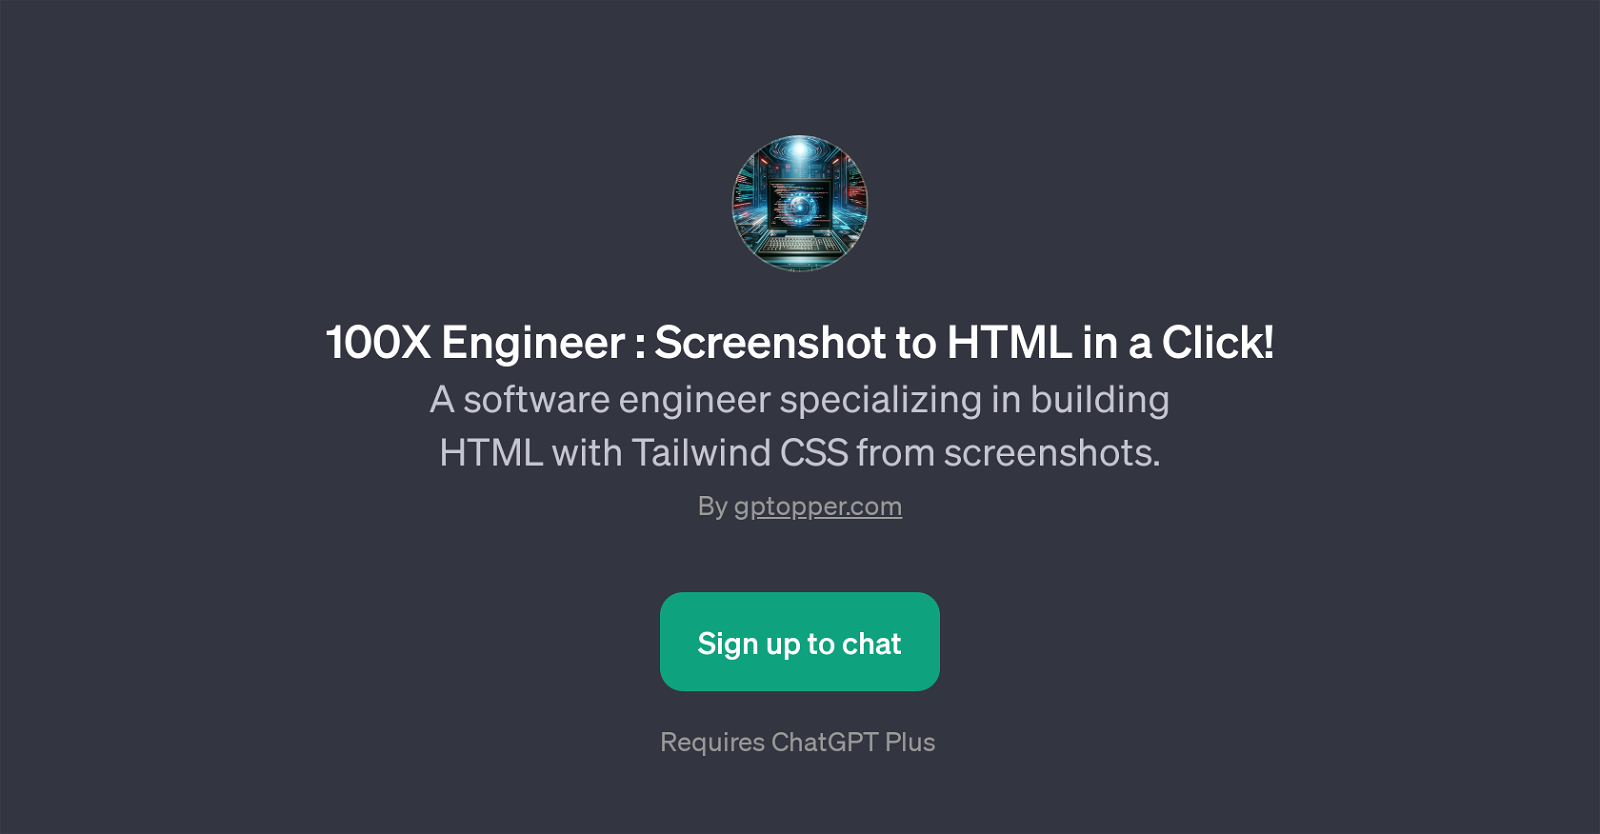 100X Engineer: Screenshot to HTML in a Click website